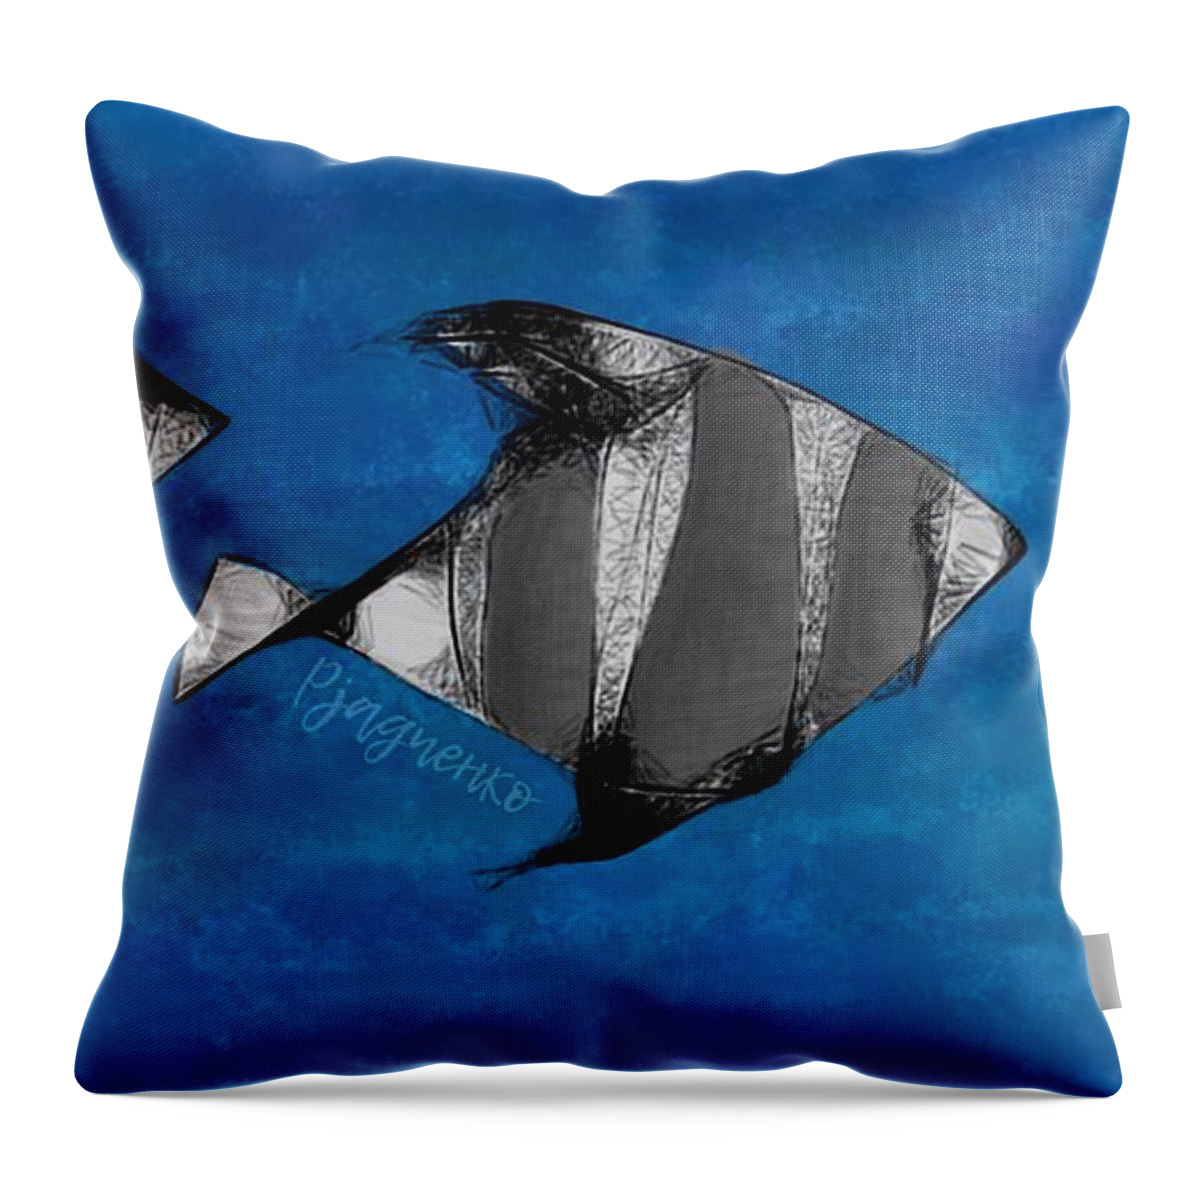 Blue Throw Pillow featuring the digital art Silver barbs in hurry by Ljev Rjadcenko